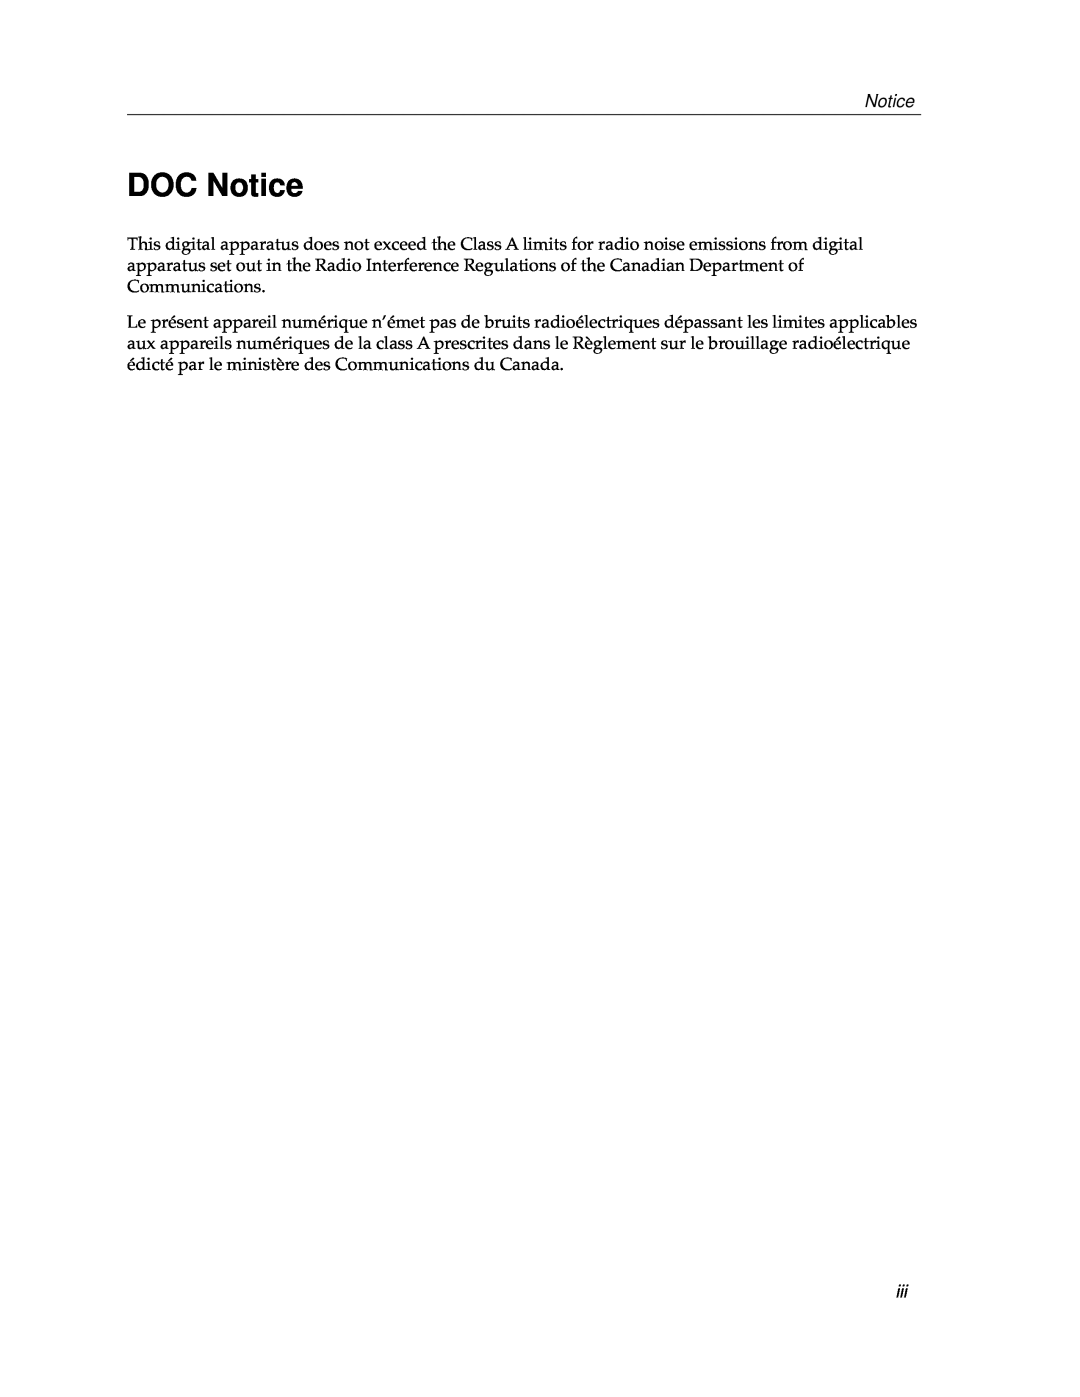 Cabletron Systems 9F106-01 manual DOC Notice 